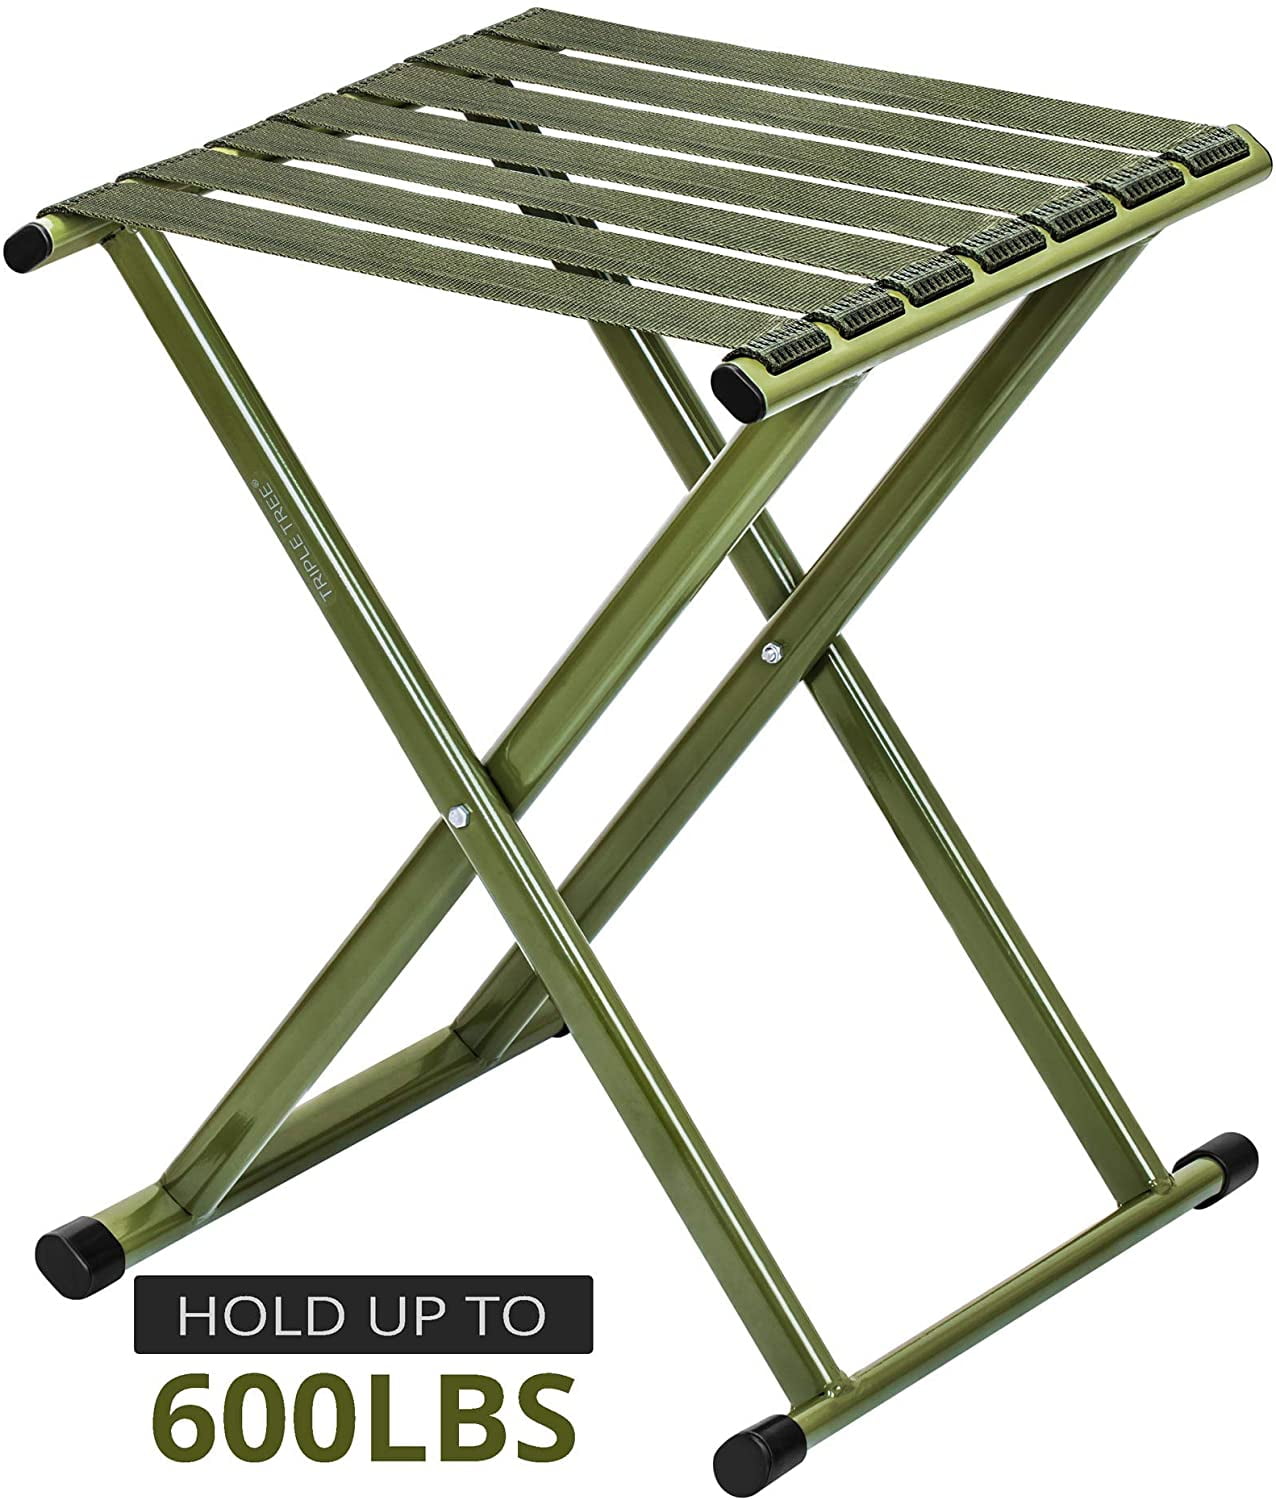 Details about  / Telescoping Stool Collapsible Portable 330lb Max Load Camping Folding Seat Blue